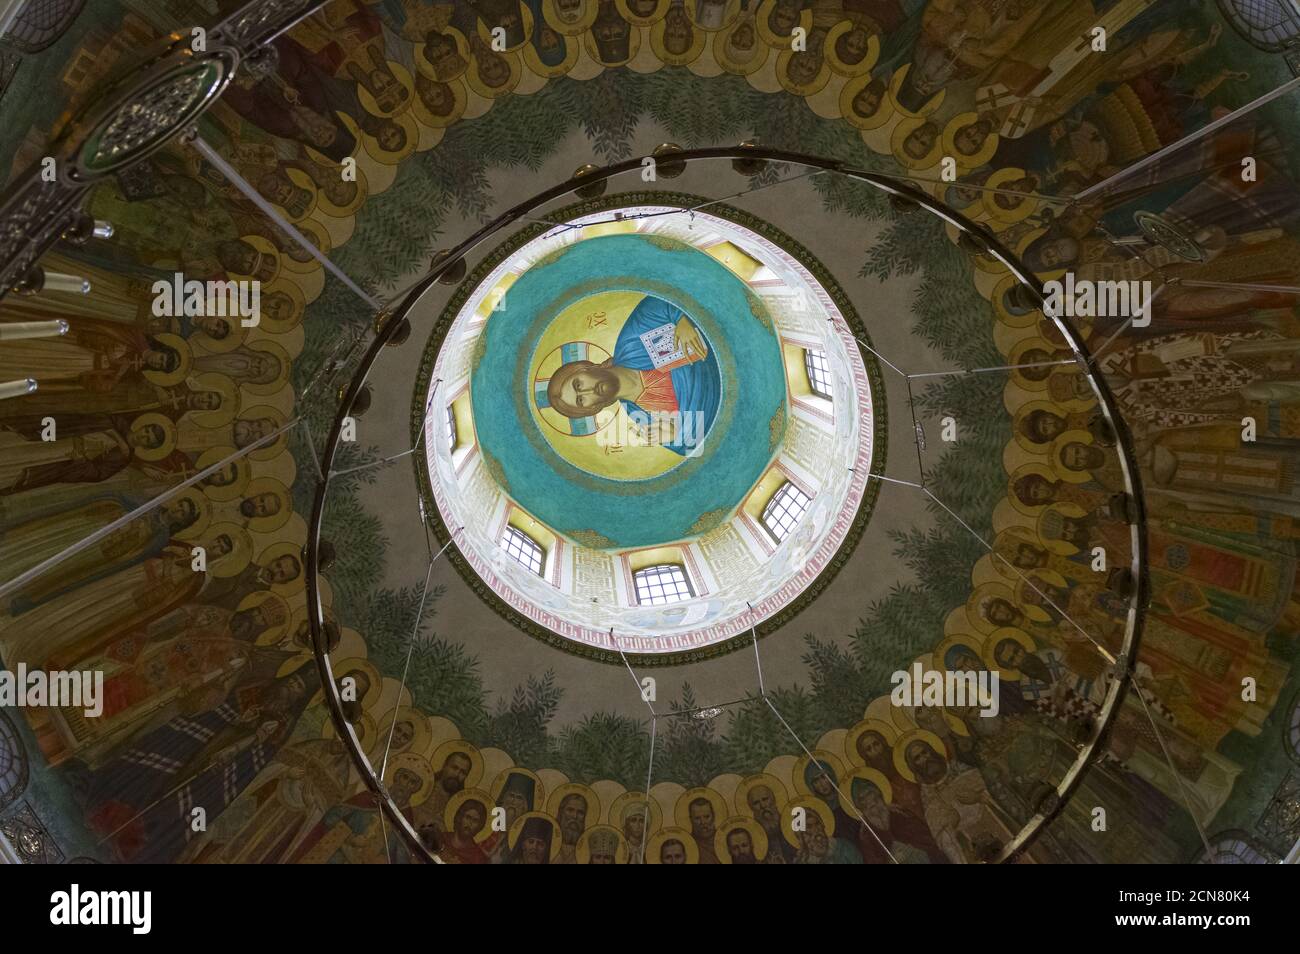 Ceiling painting in an Orthodox church. Stock Photo